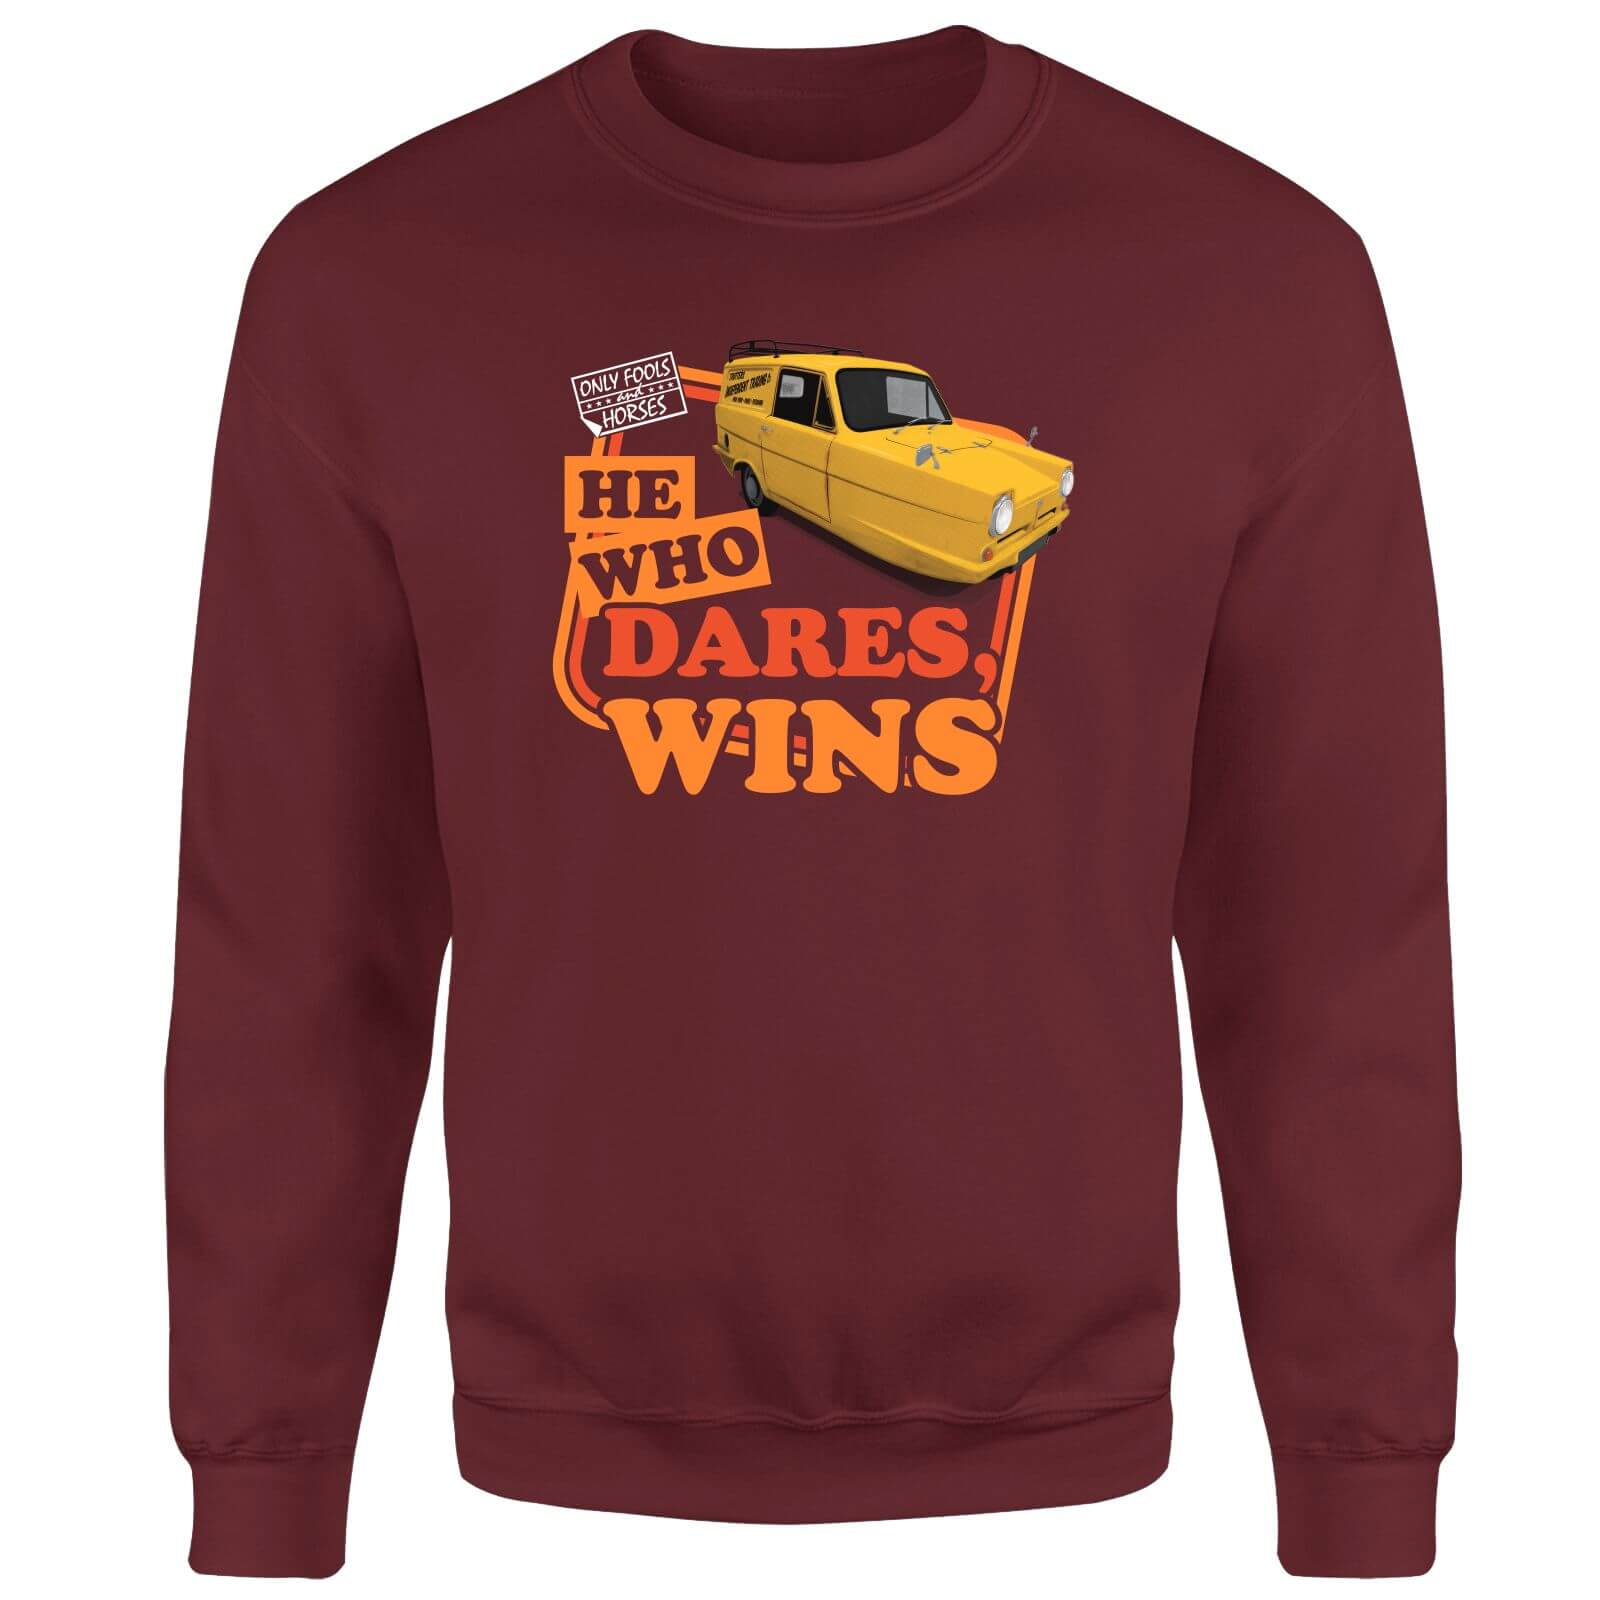 Only Fools And Horses He Who Dares, Wins Sweatshirt - Burgundy - XXL